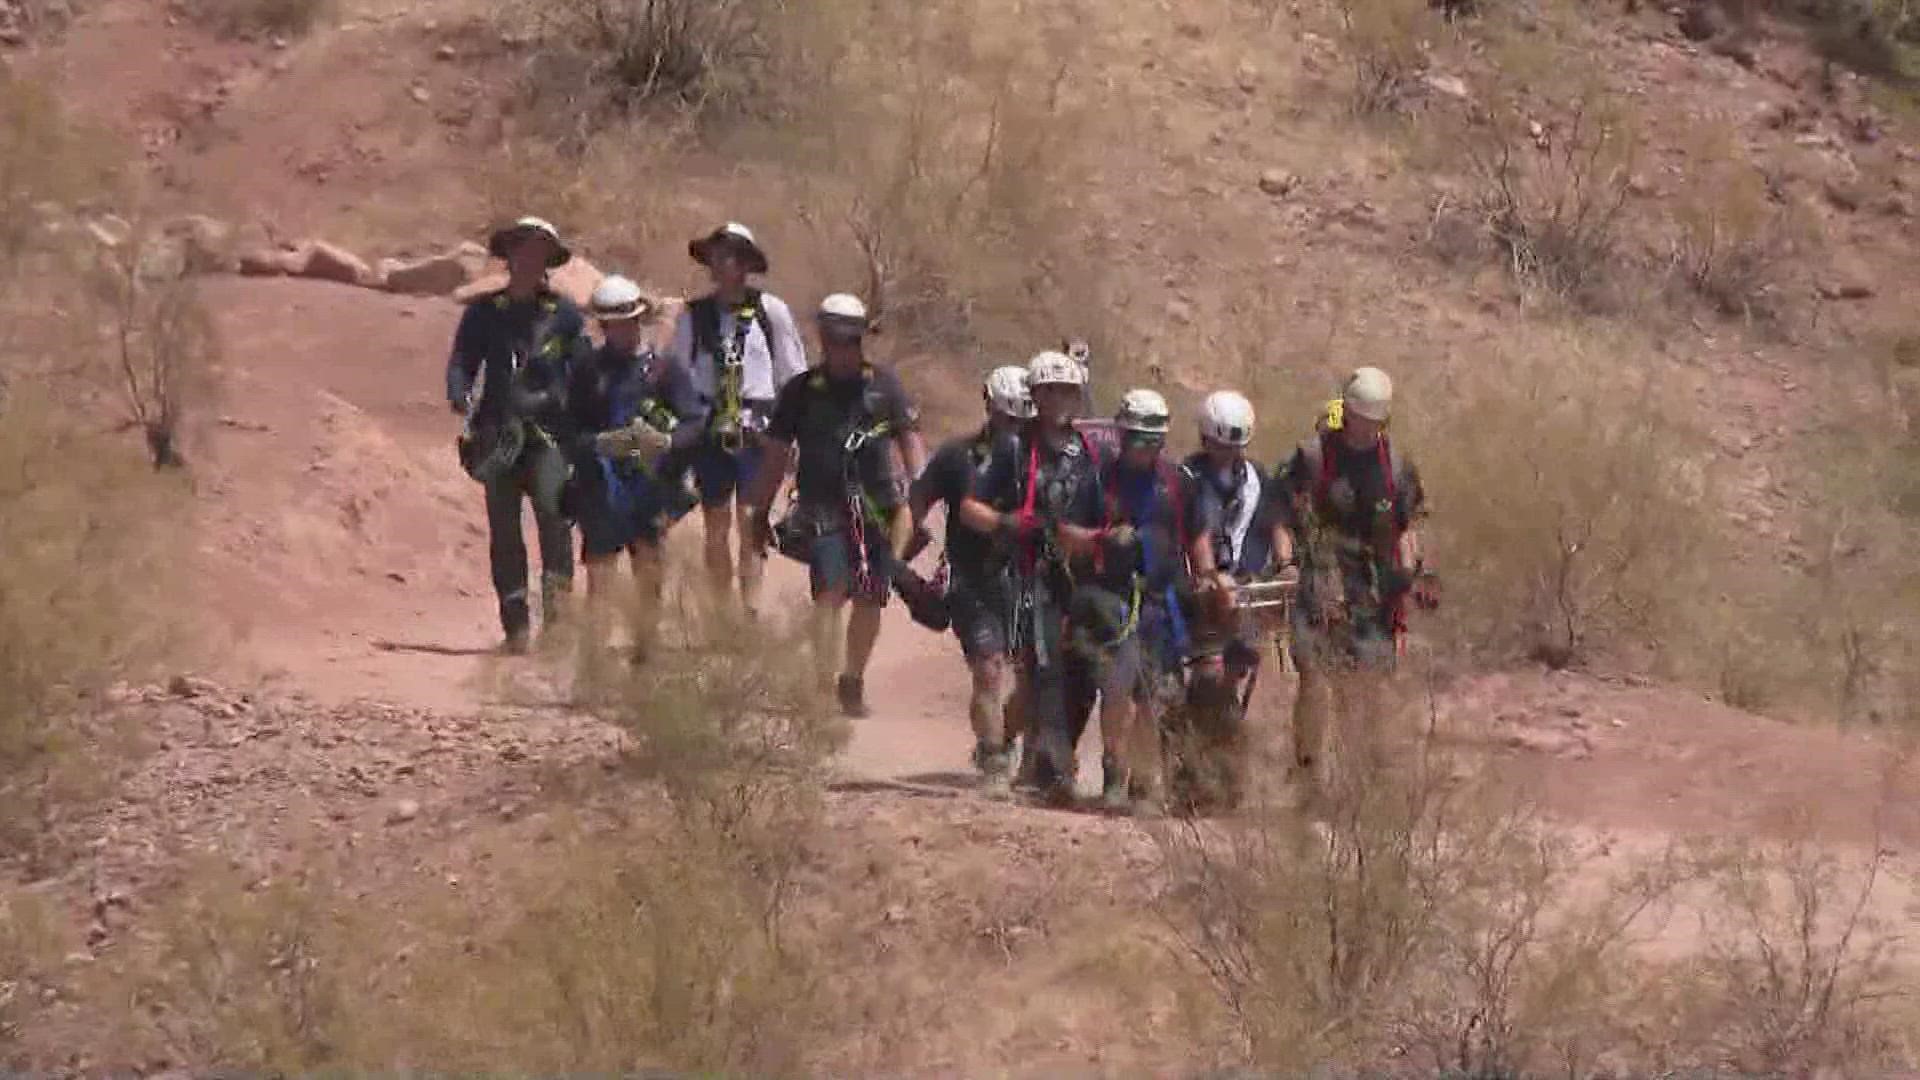 Phoenix Fire says three hikers had to be taken to the hospital for heat-related illnesses and others needed help off the trail.